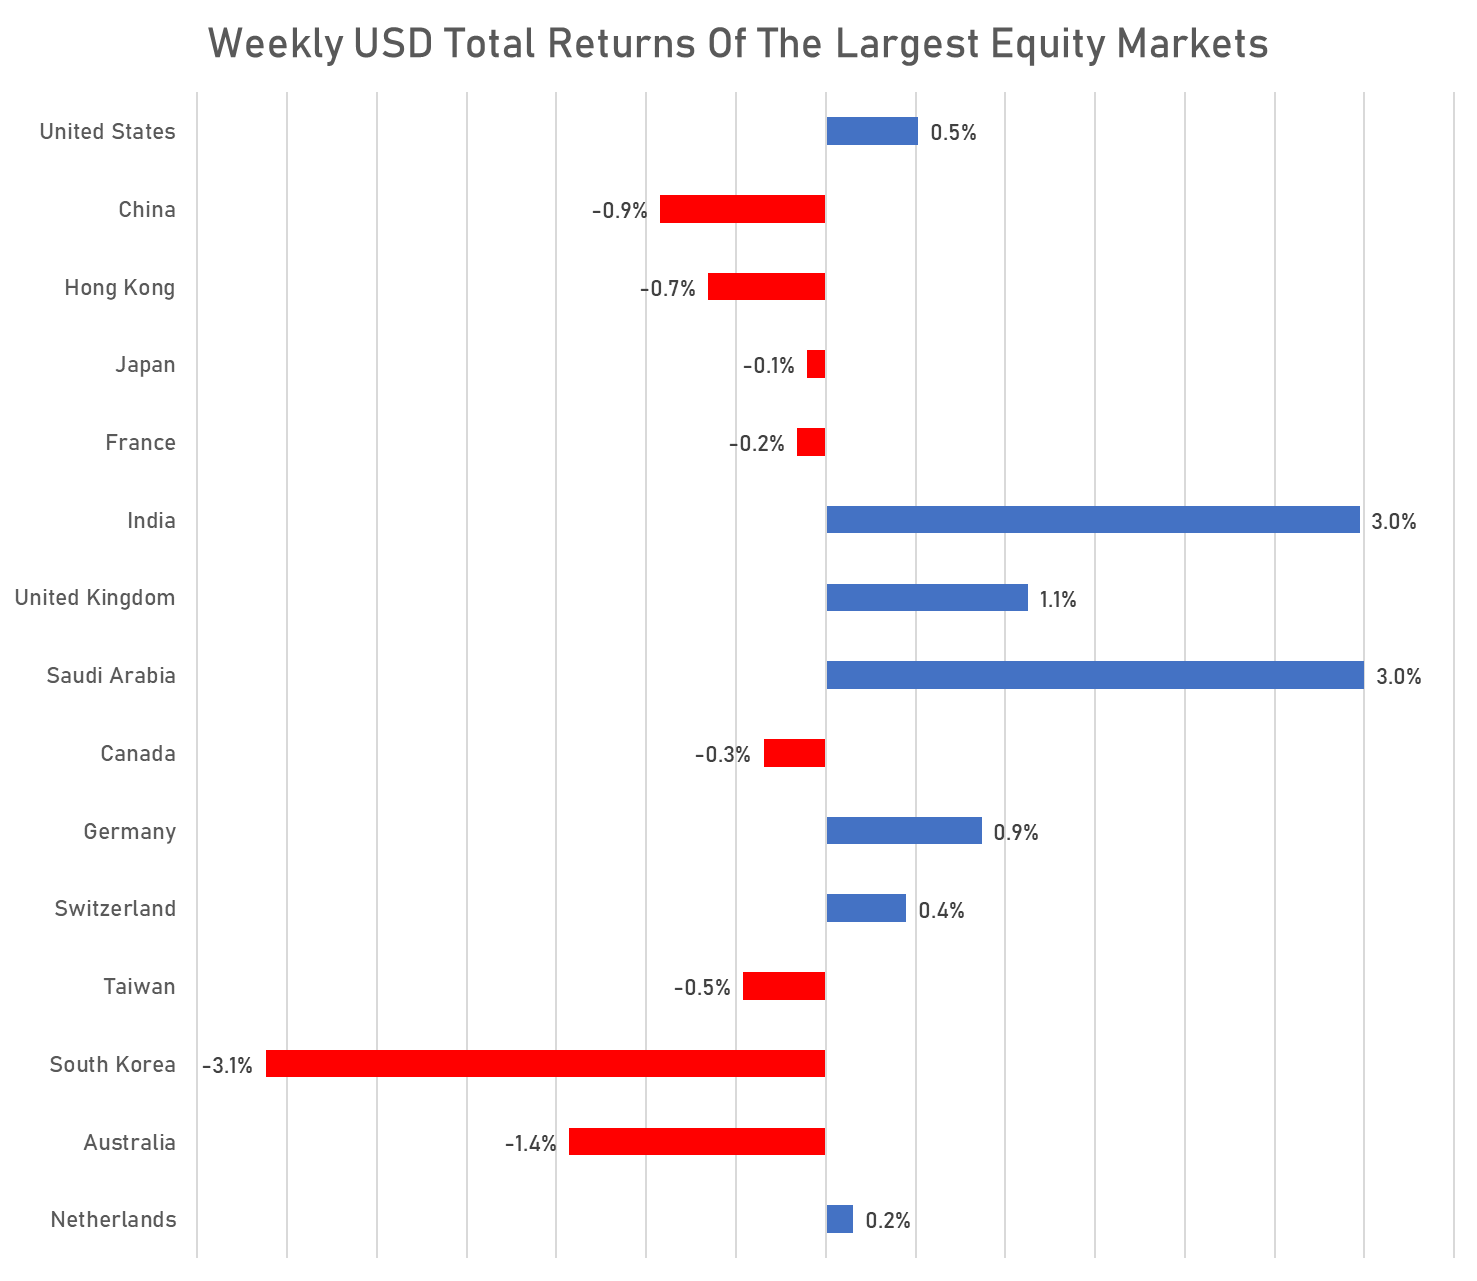 Weekly USD Total Returns for major markets | Sources: phipost.com, FactSet data